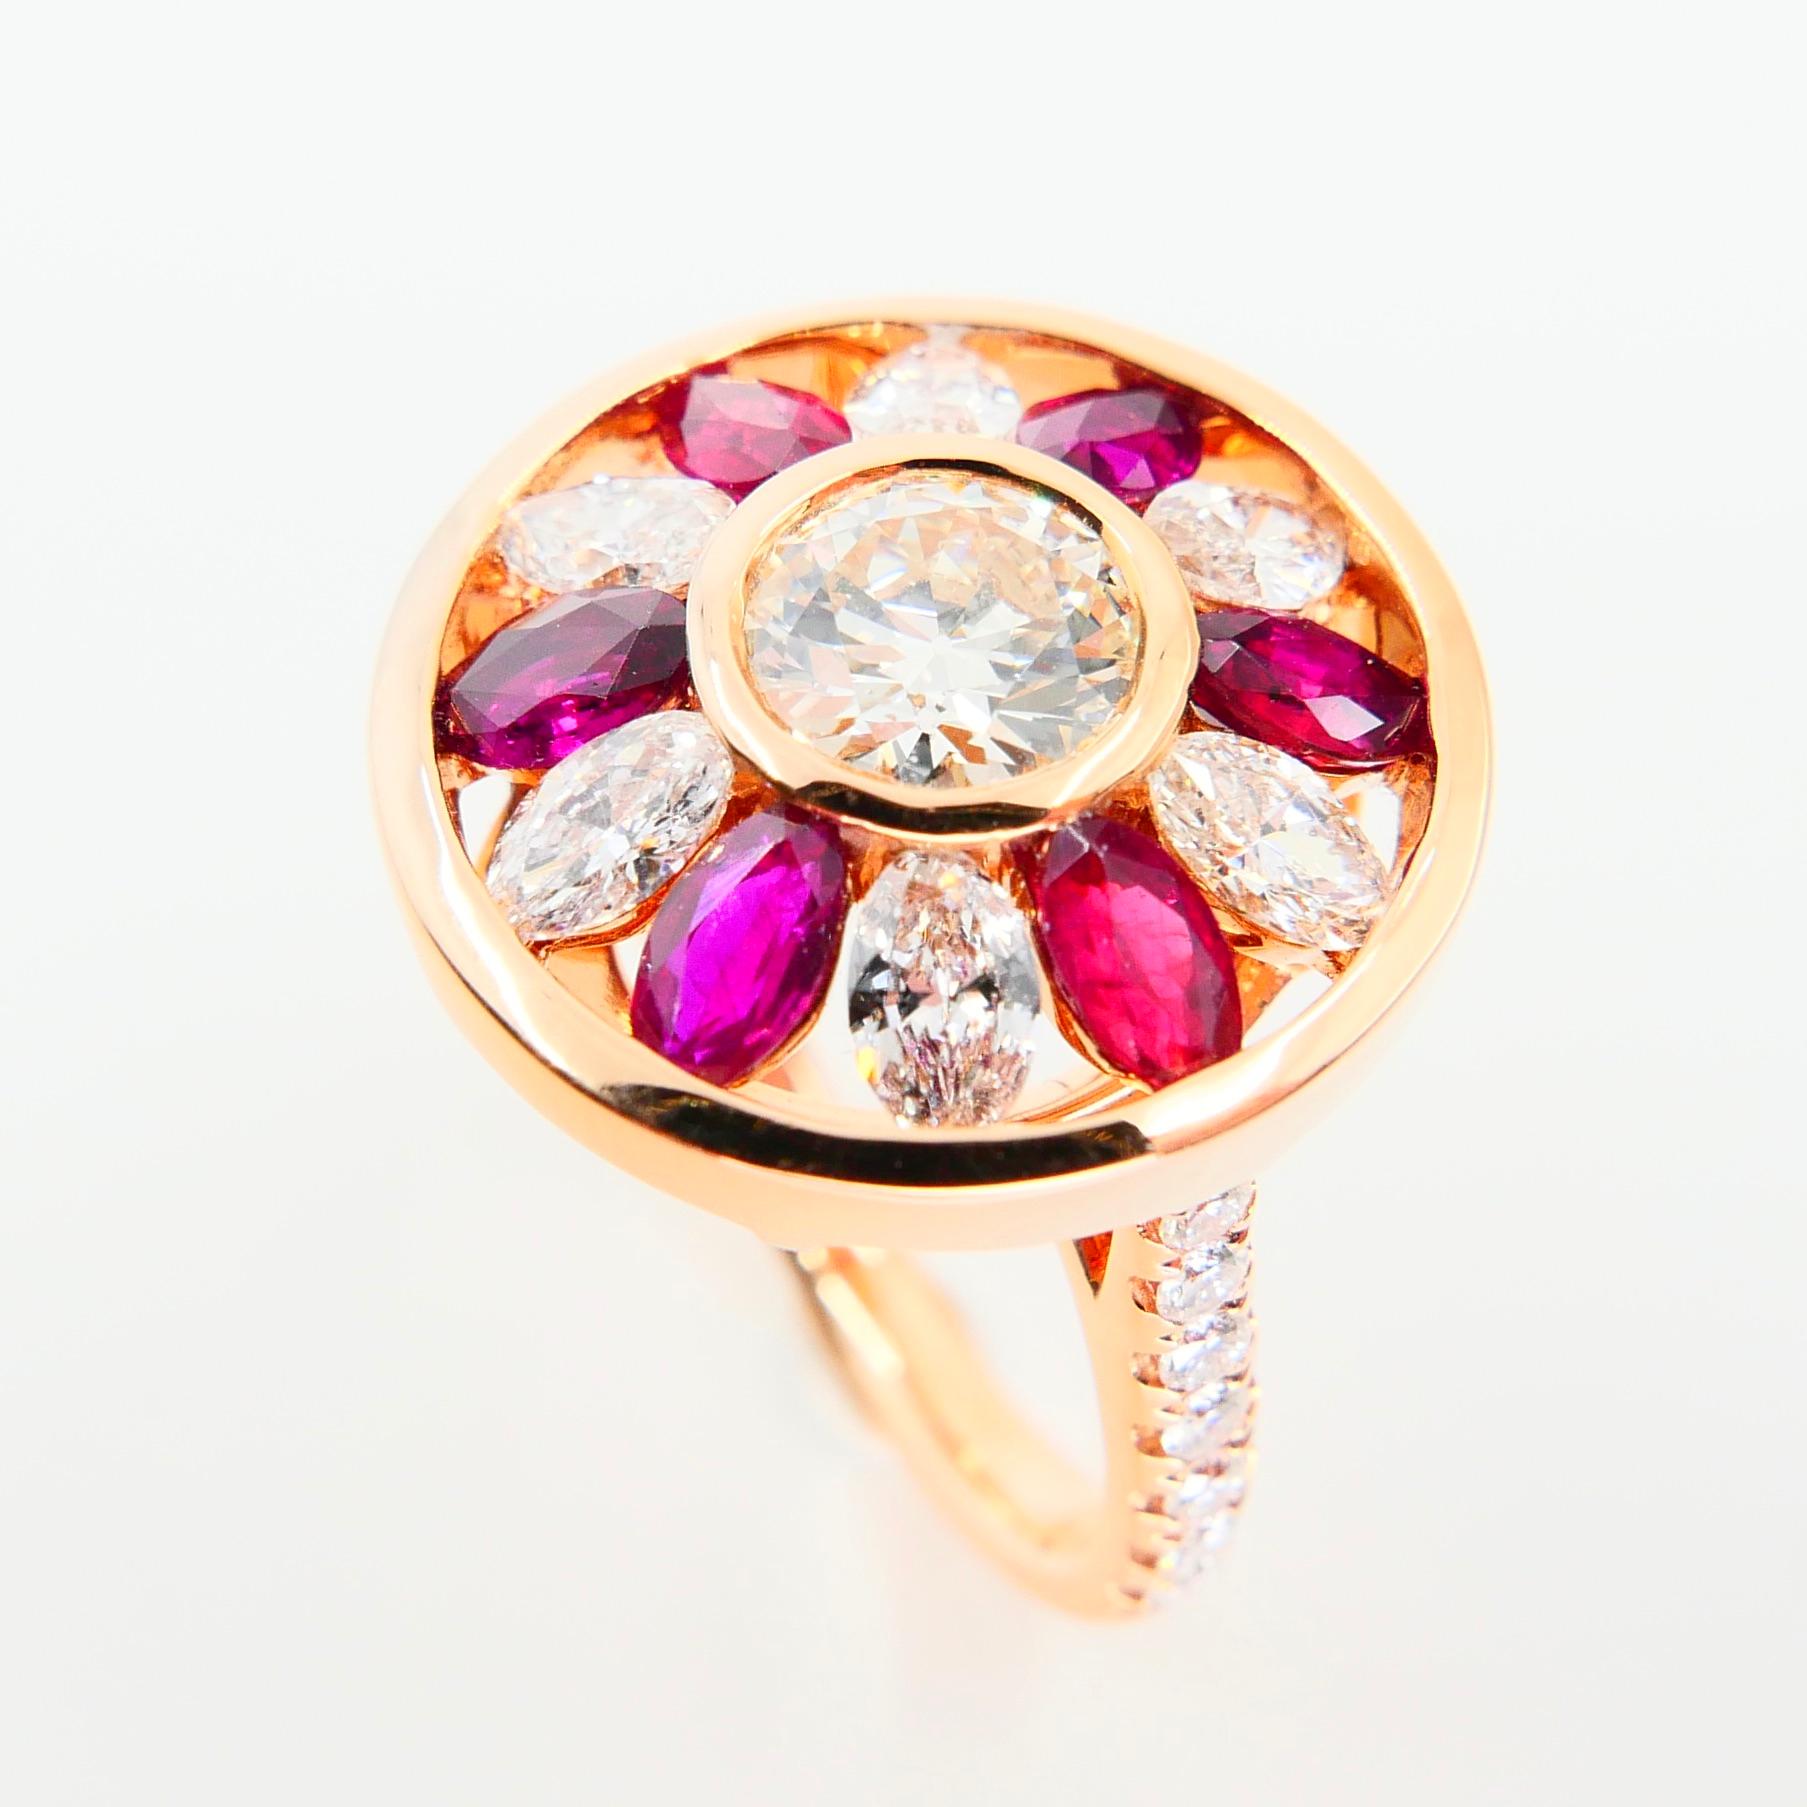 Certified 1.53 Cts Natural Burma Ruby & Old Cut Diamond Ring, 18K Rose Gold 3